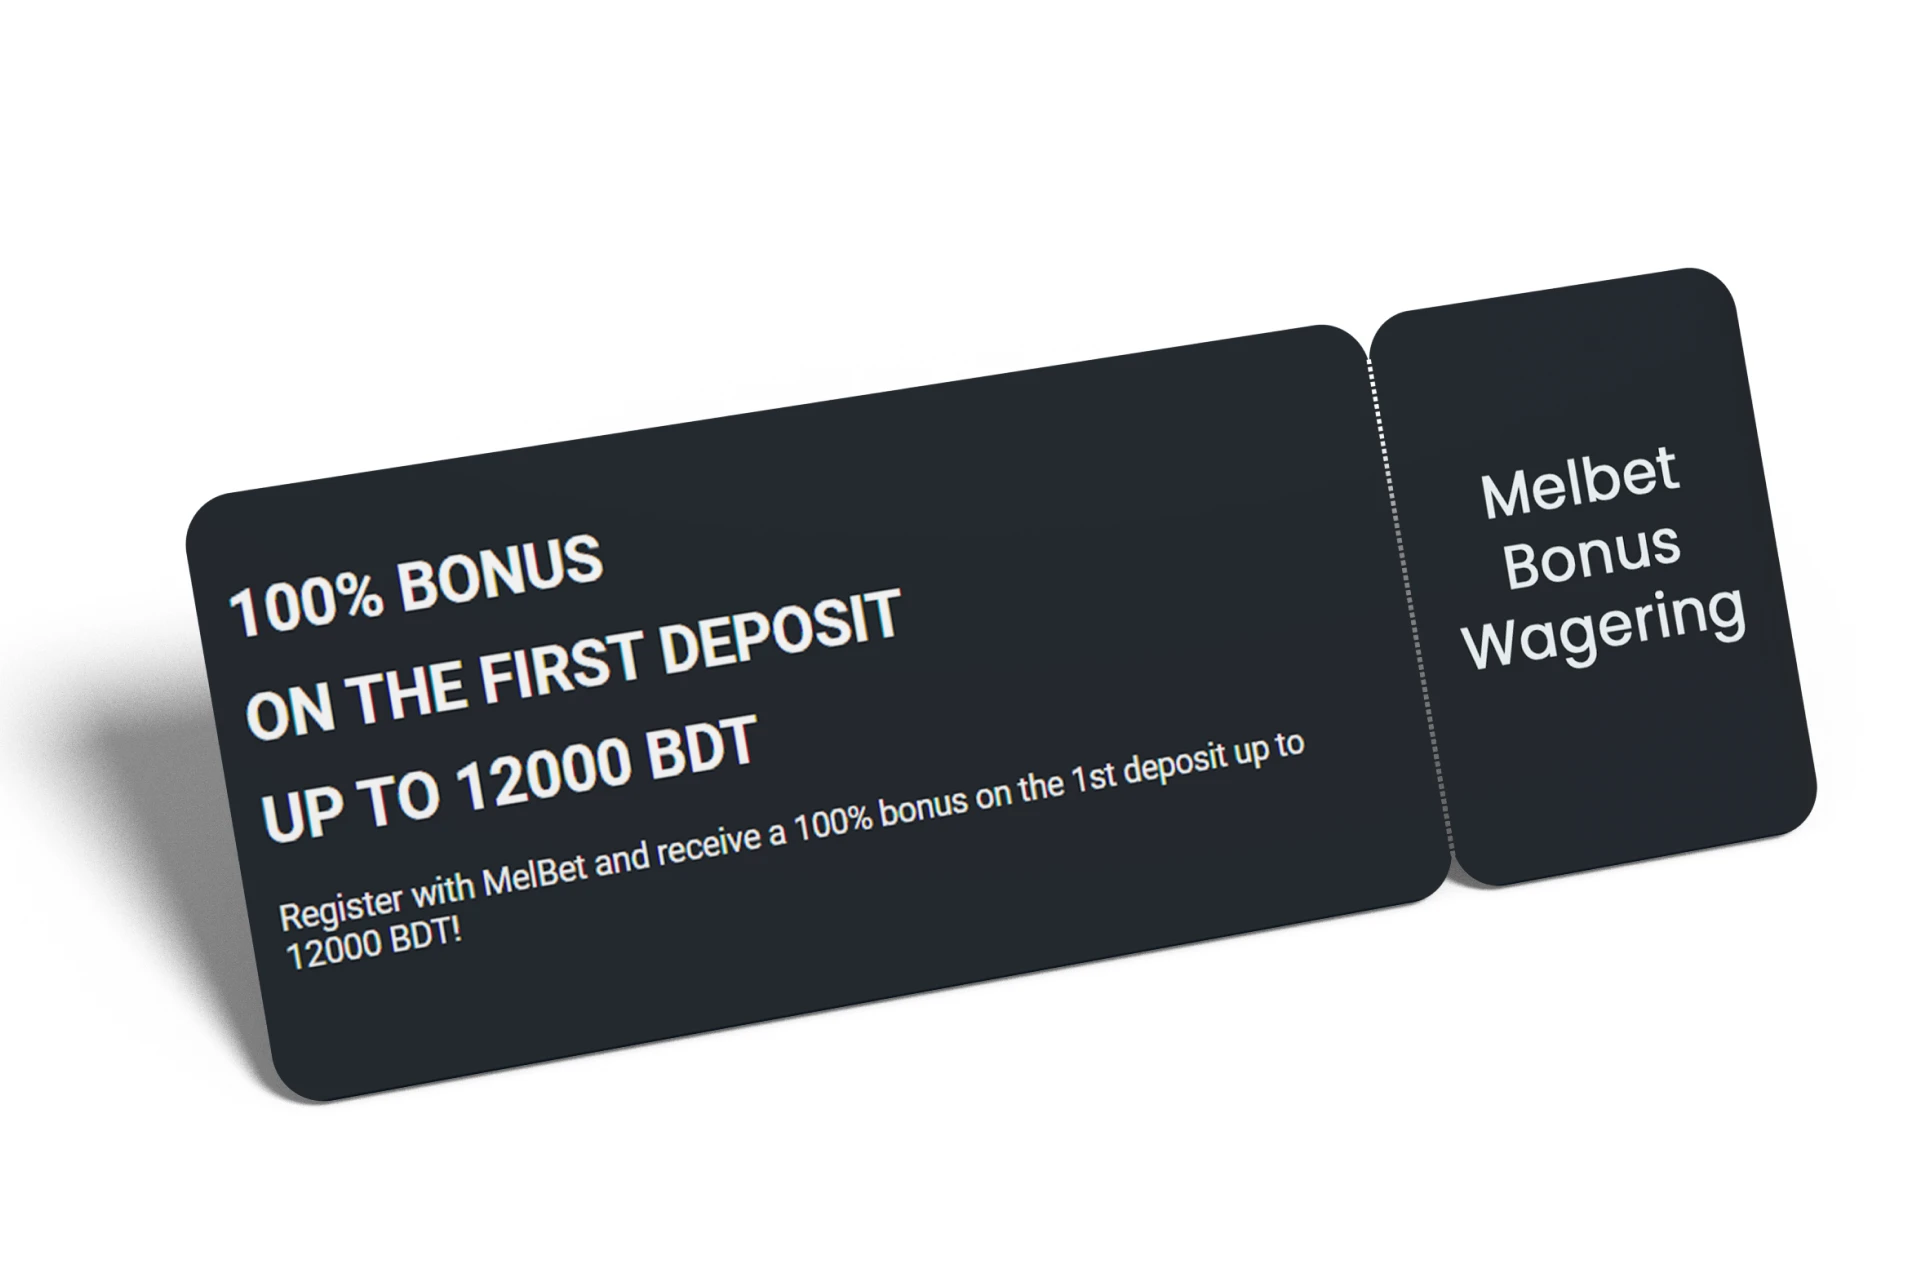 Here are some wagering requirements to take advantage of the welcome bonus.